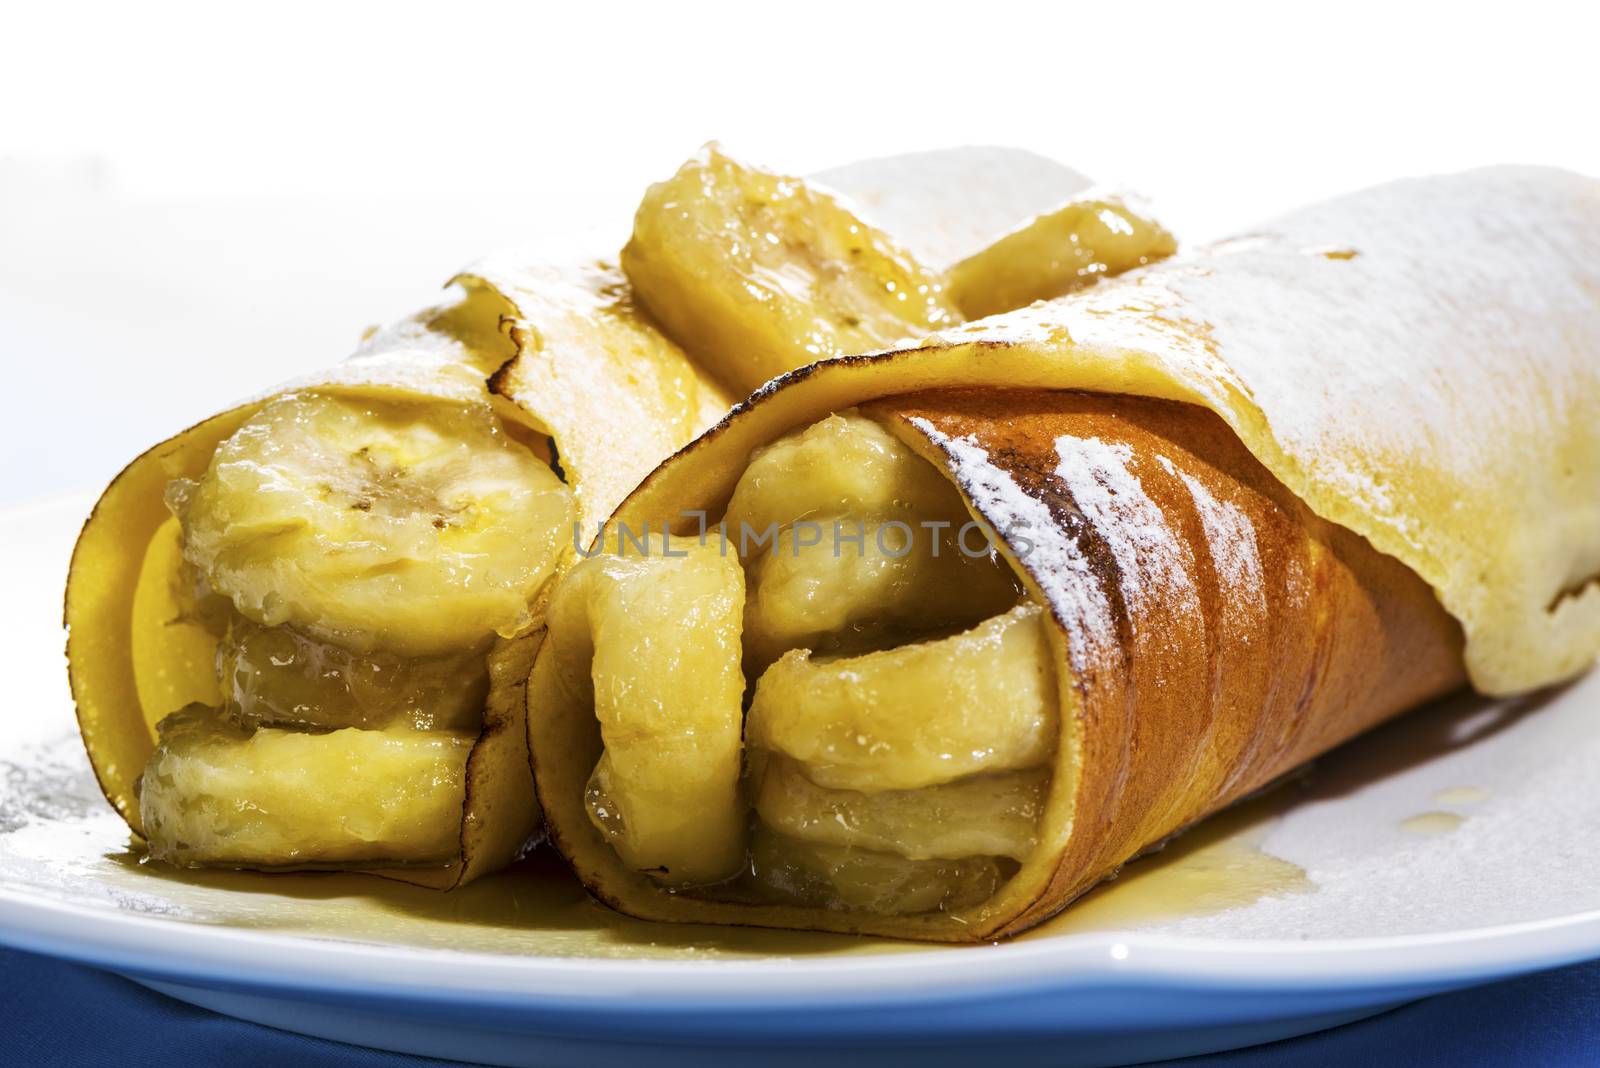 Delicious freshly baked pancakes or crepes filled with banana a gourmet dessert